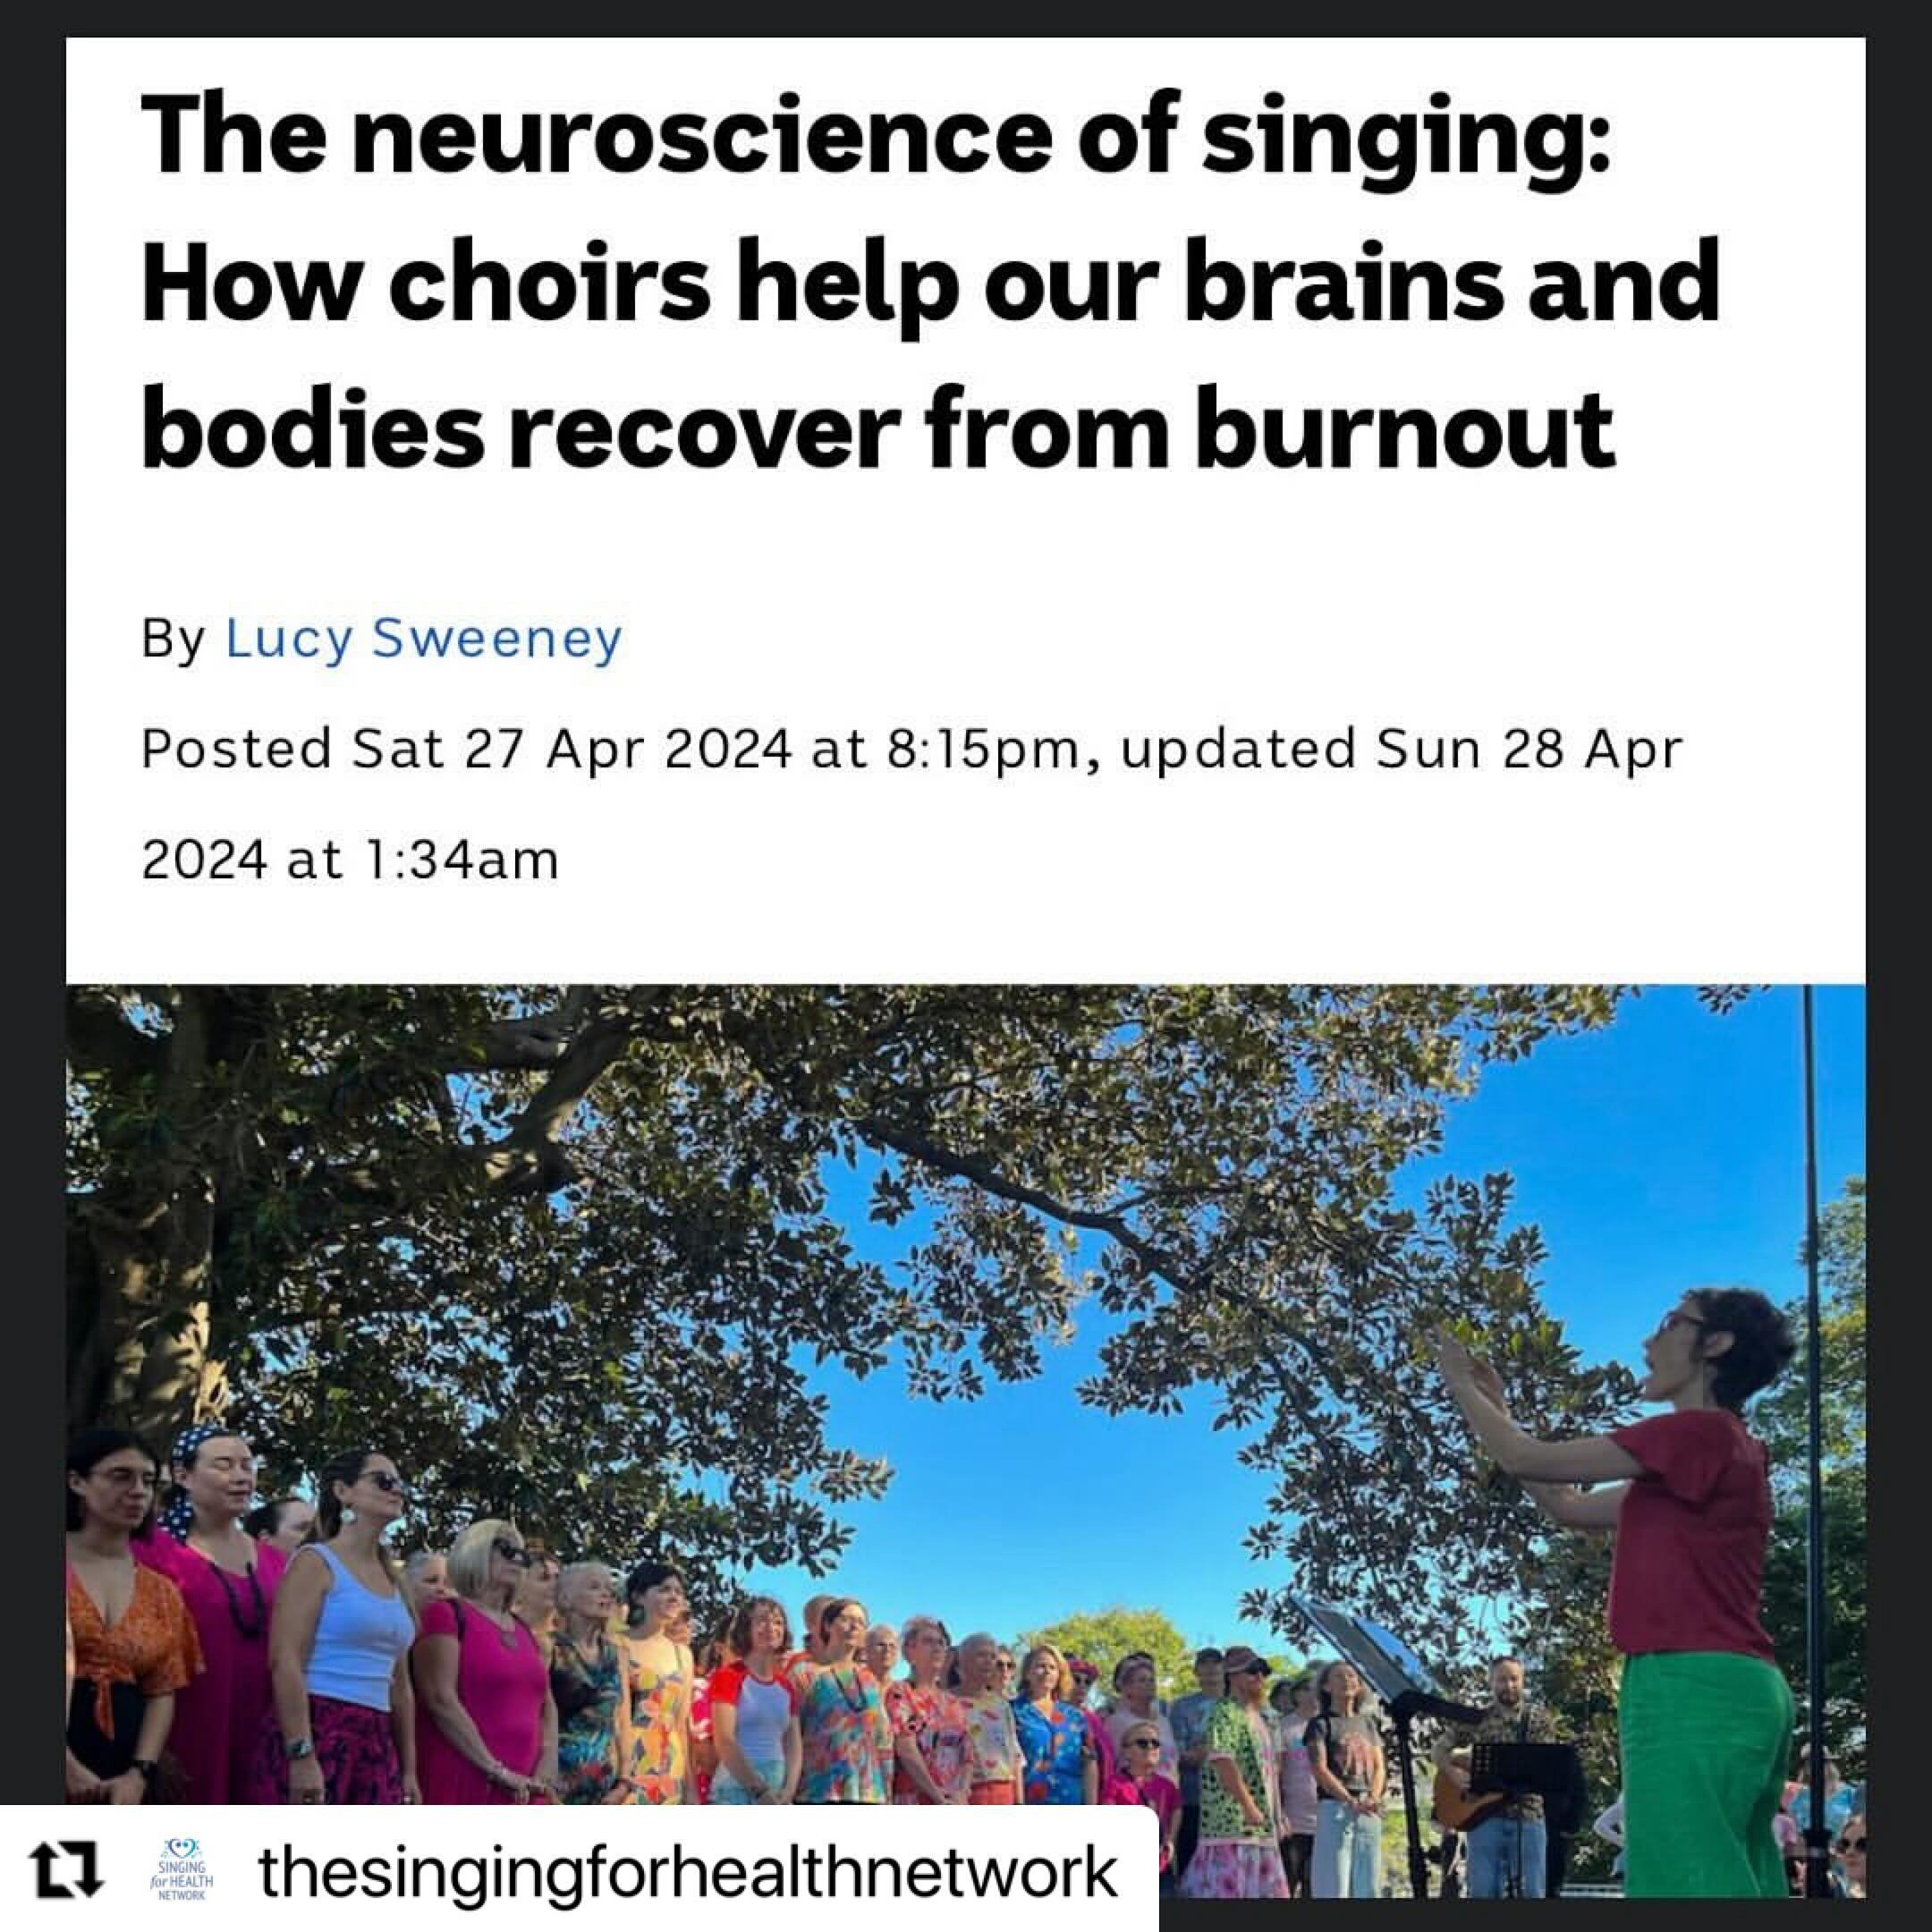 #Repost @thesingingforhealthnetwork 
・・・
It was wonderful to see the coverage given to the multiple health, social and emotional benefits of group singing in this article from @abcnews_au 

The article explores in detail the potential healing and rec